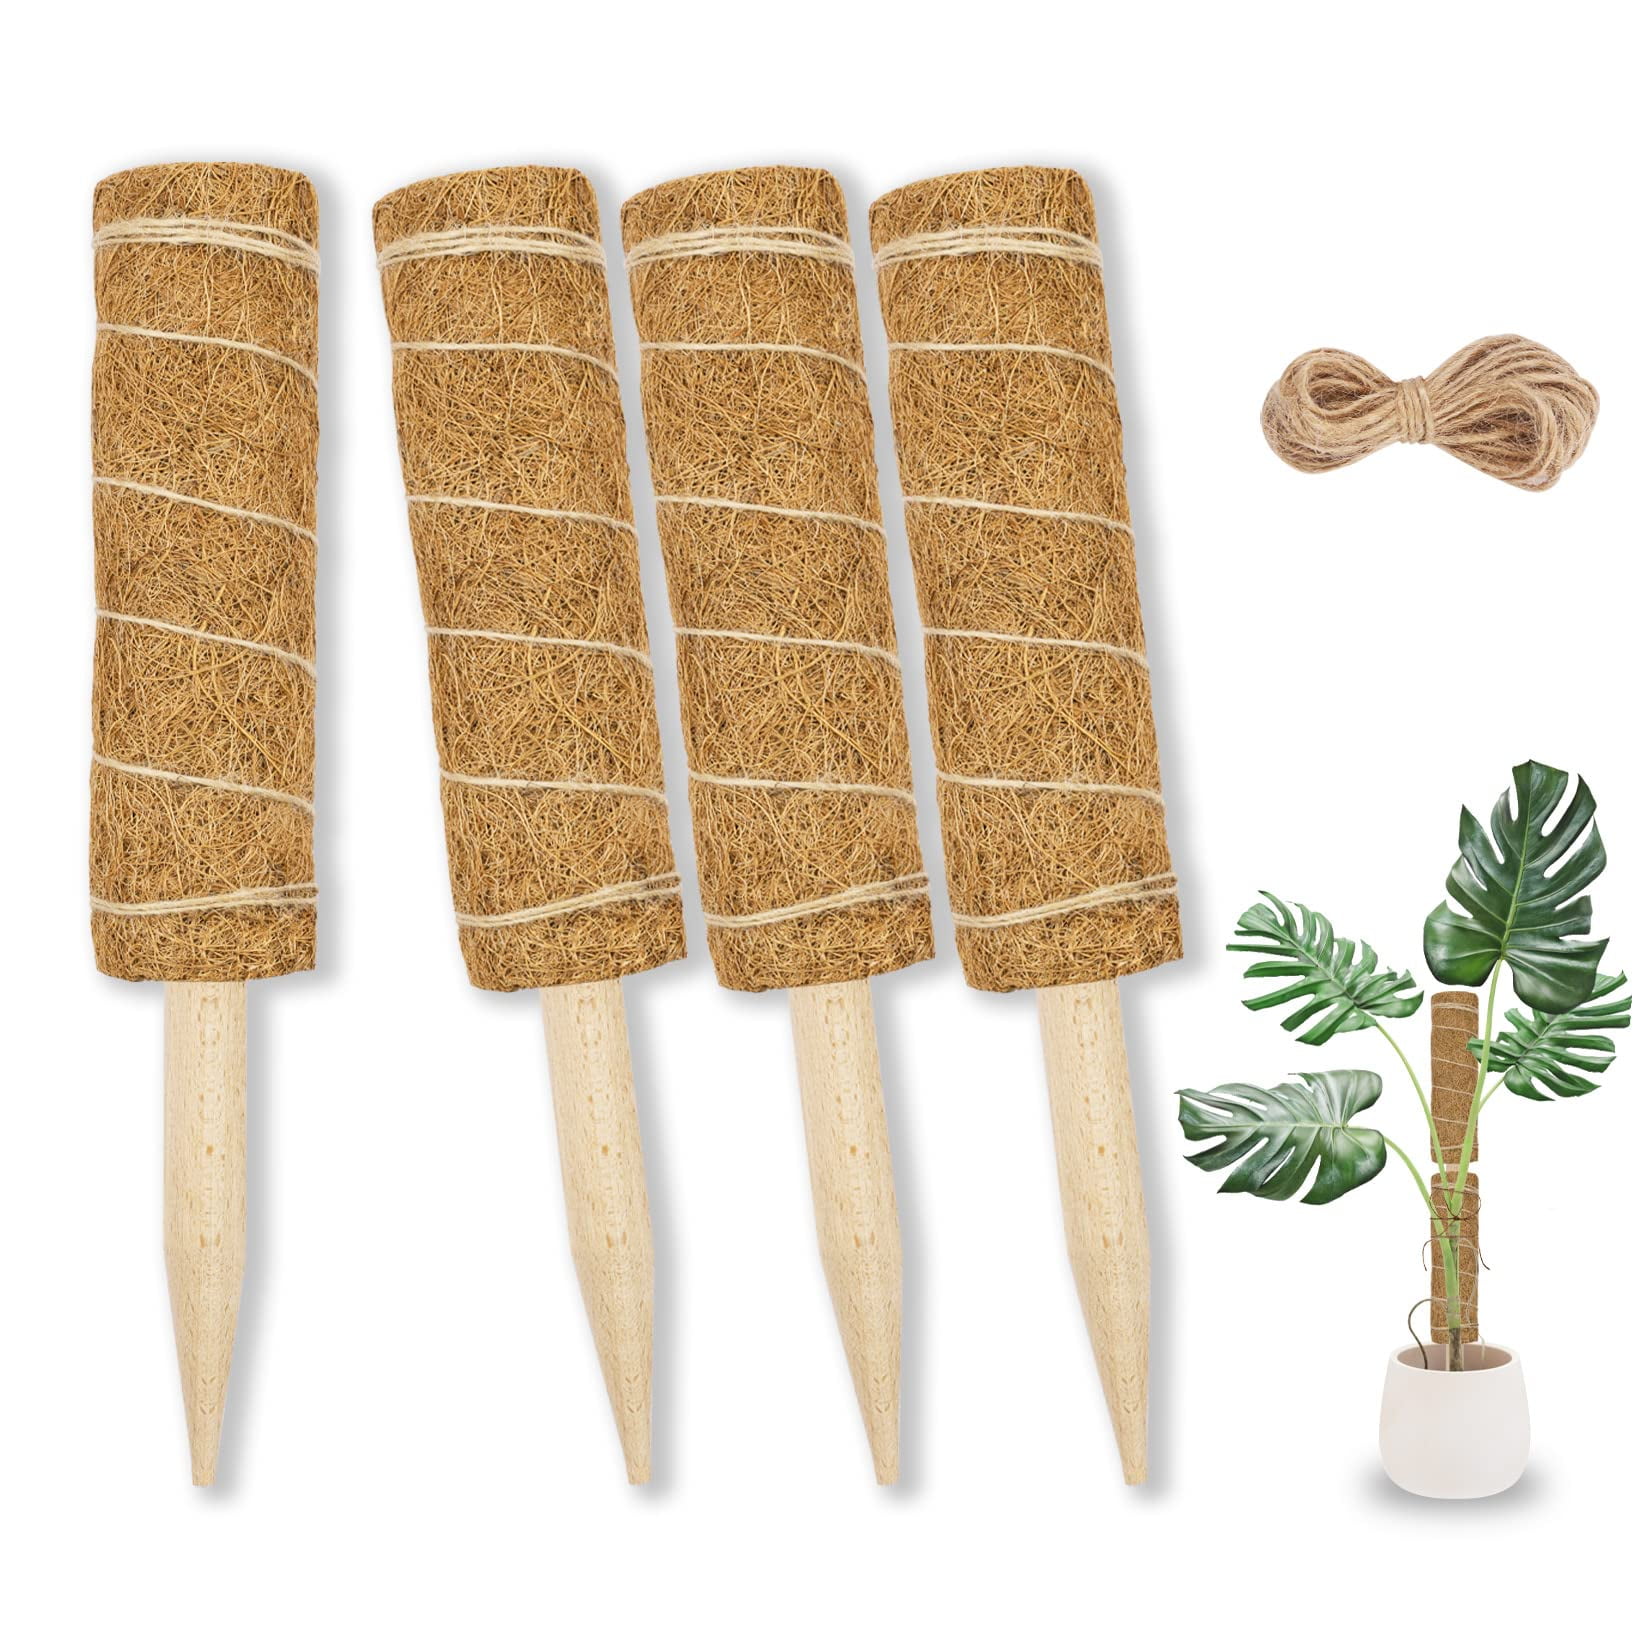 Details about   Jjzj 4 Pack 17 Inches Coir Totem Pole Coir Moss Stick With 1 Pcs 78 Inch Twine F 